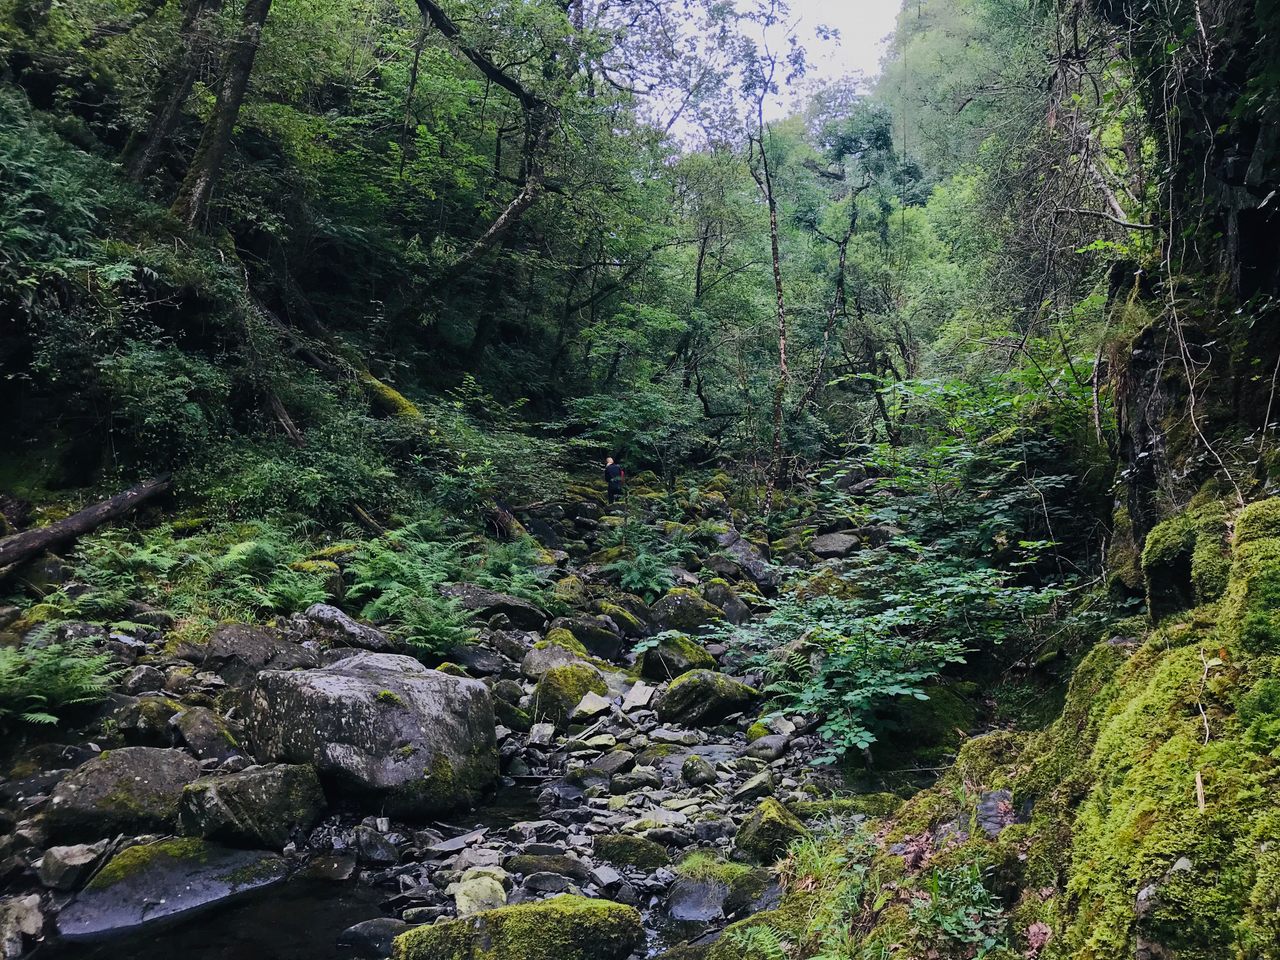 Ceunant Llennyrch National Nature Reserve in Wales is home to one of Britain's few remaining temperate rainforests.